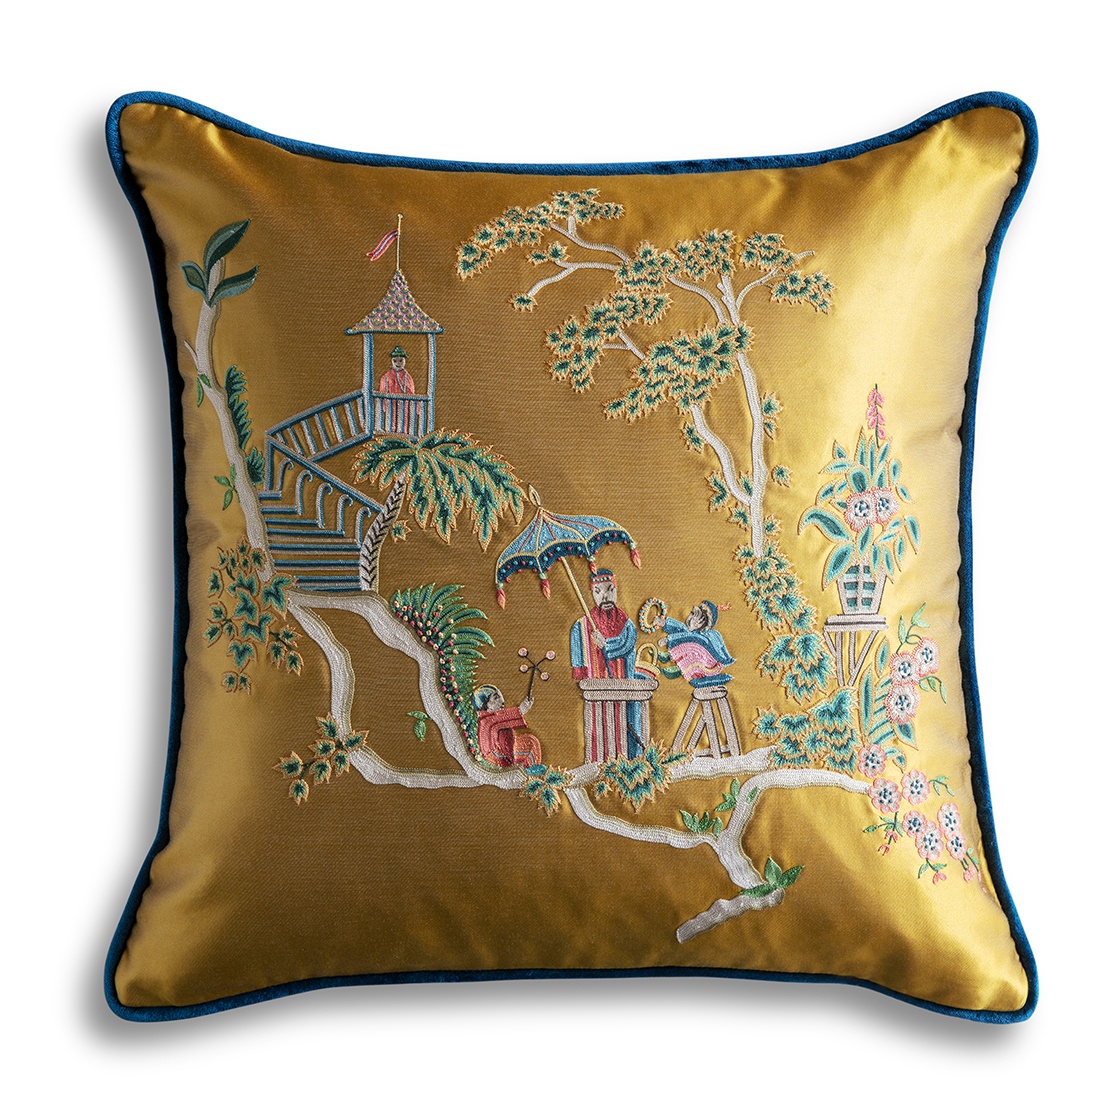 Cathay cushion in Gold satin with Capri - Prussian Blue - Beaumont & Fletcher